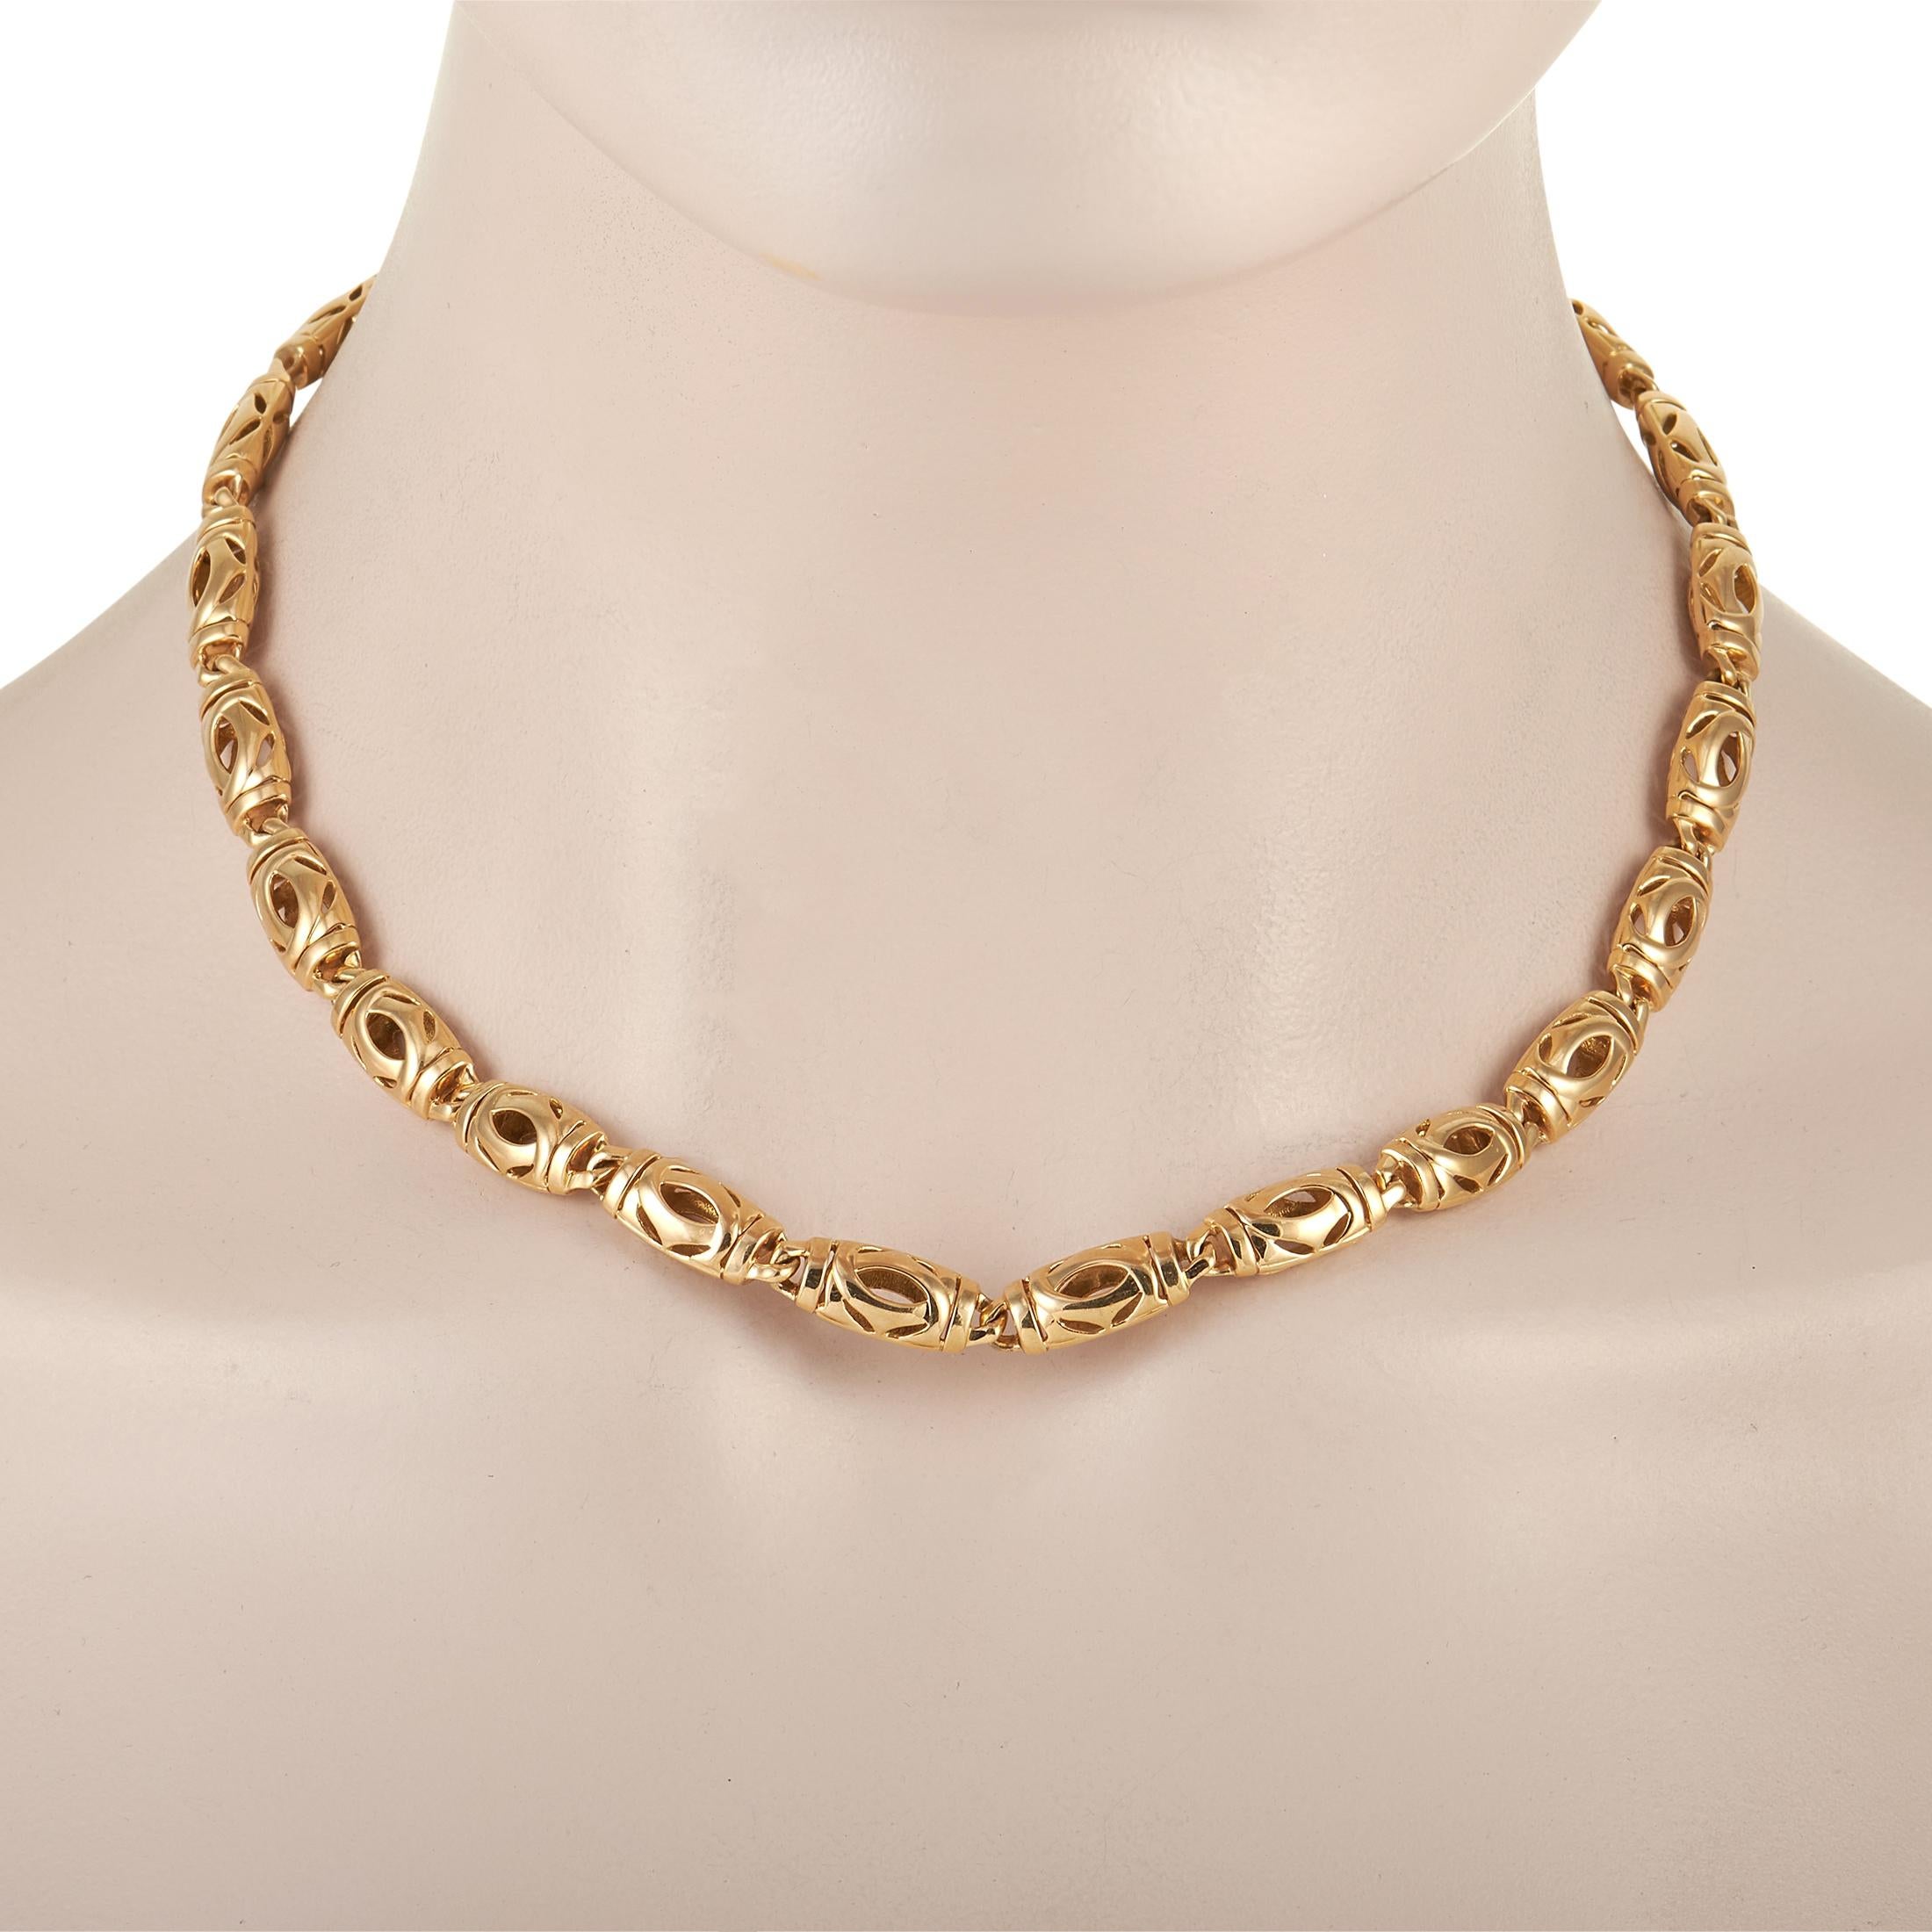 A bold design makes this luxury piece a confident work of art that will instantly elevate your overall aesthetic. Crafted from 18K Yellow Gold, this Cartier necklace features beautiful metalwork that comes to life thanks to the intricate negative